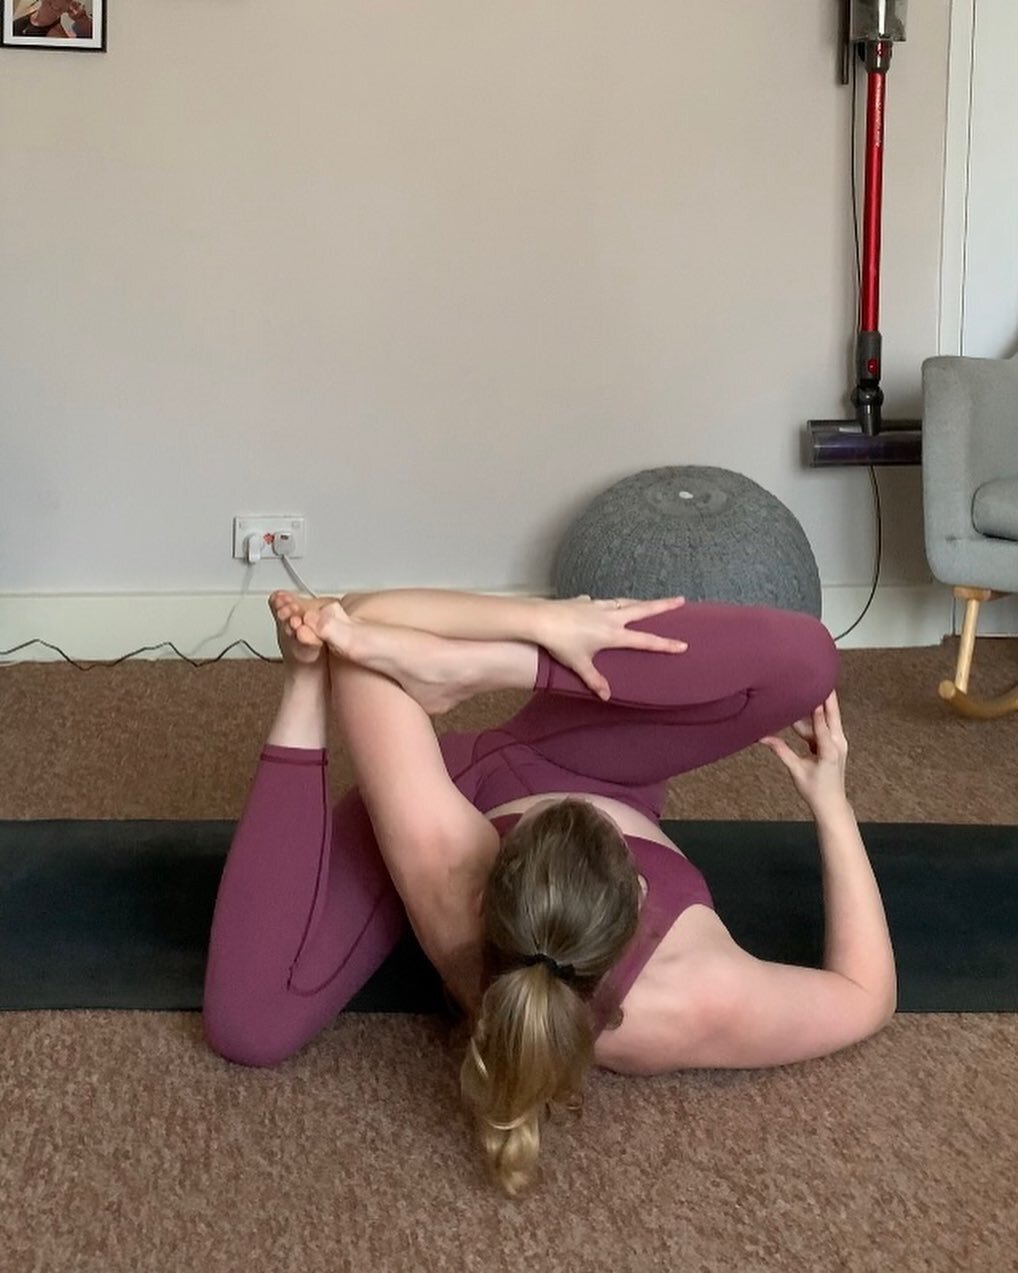 ✨ Yogi See Yogi Do ✨

Not sure if I did justice to this shape but it was fun playing with it. 🤣Hips felt super upen after this&hellip;also I cheated a bit with crossing the big toes but it had to happen 😜

Thanks for the fabulous hosts as usual. 🙏